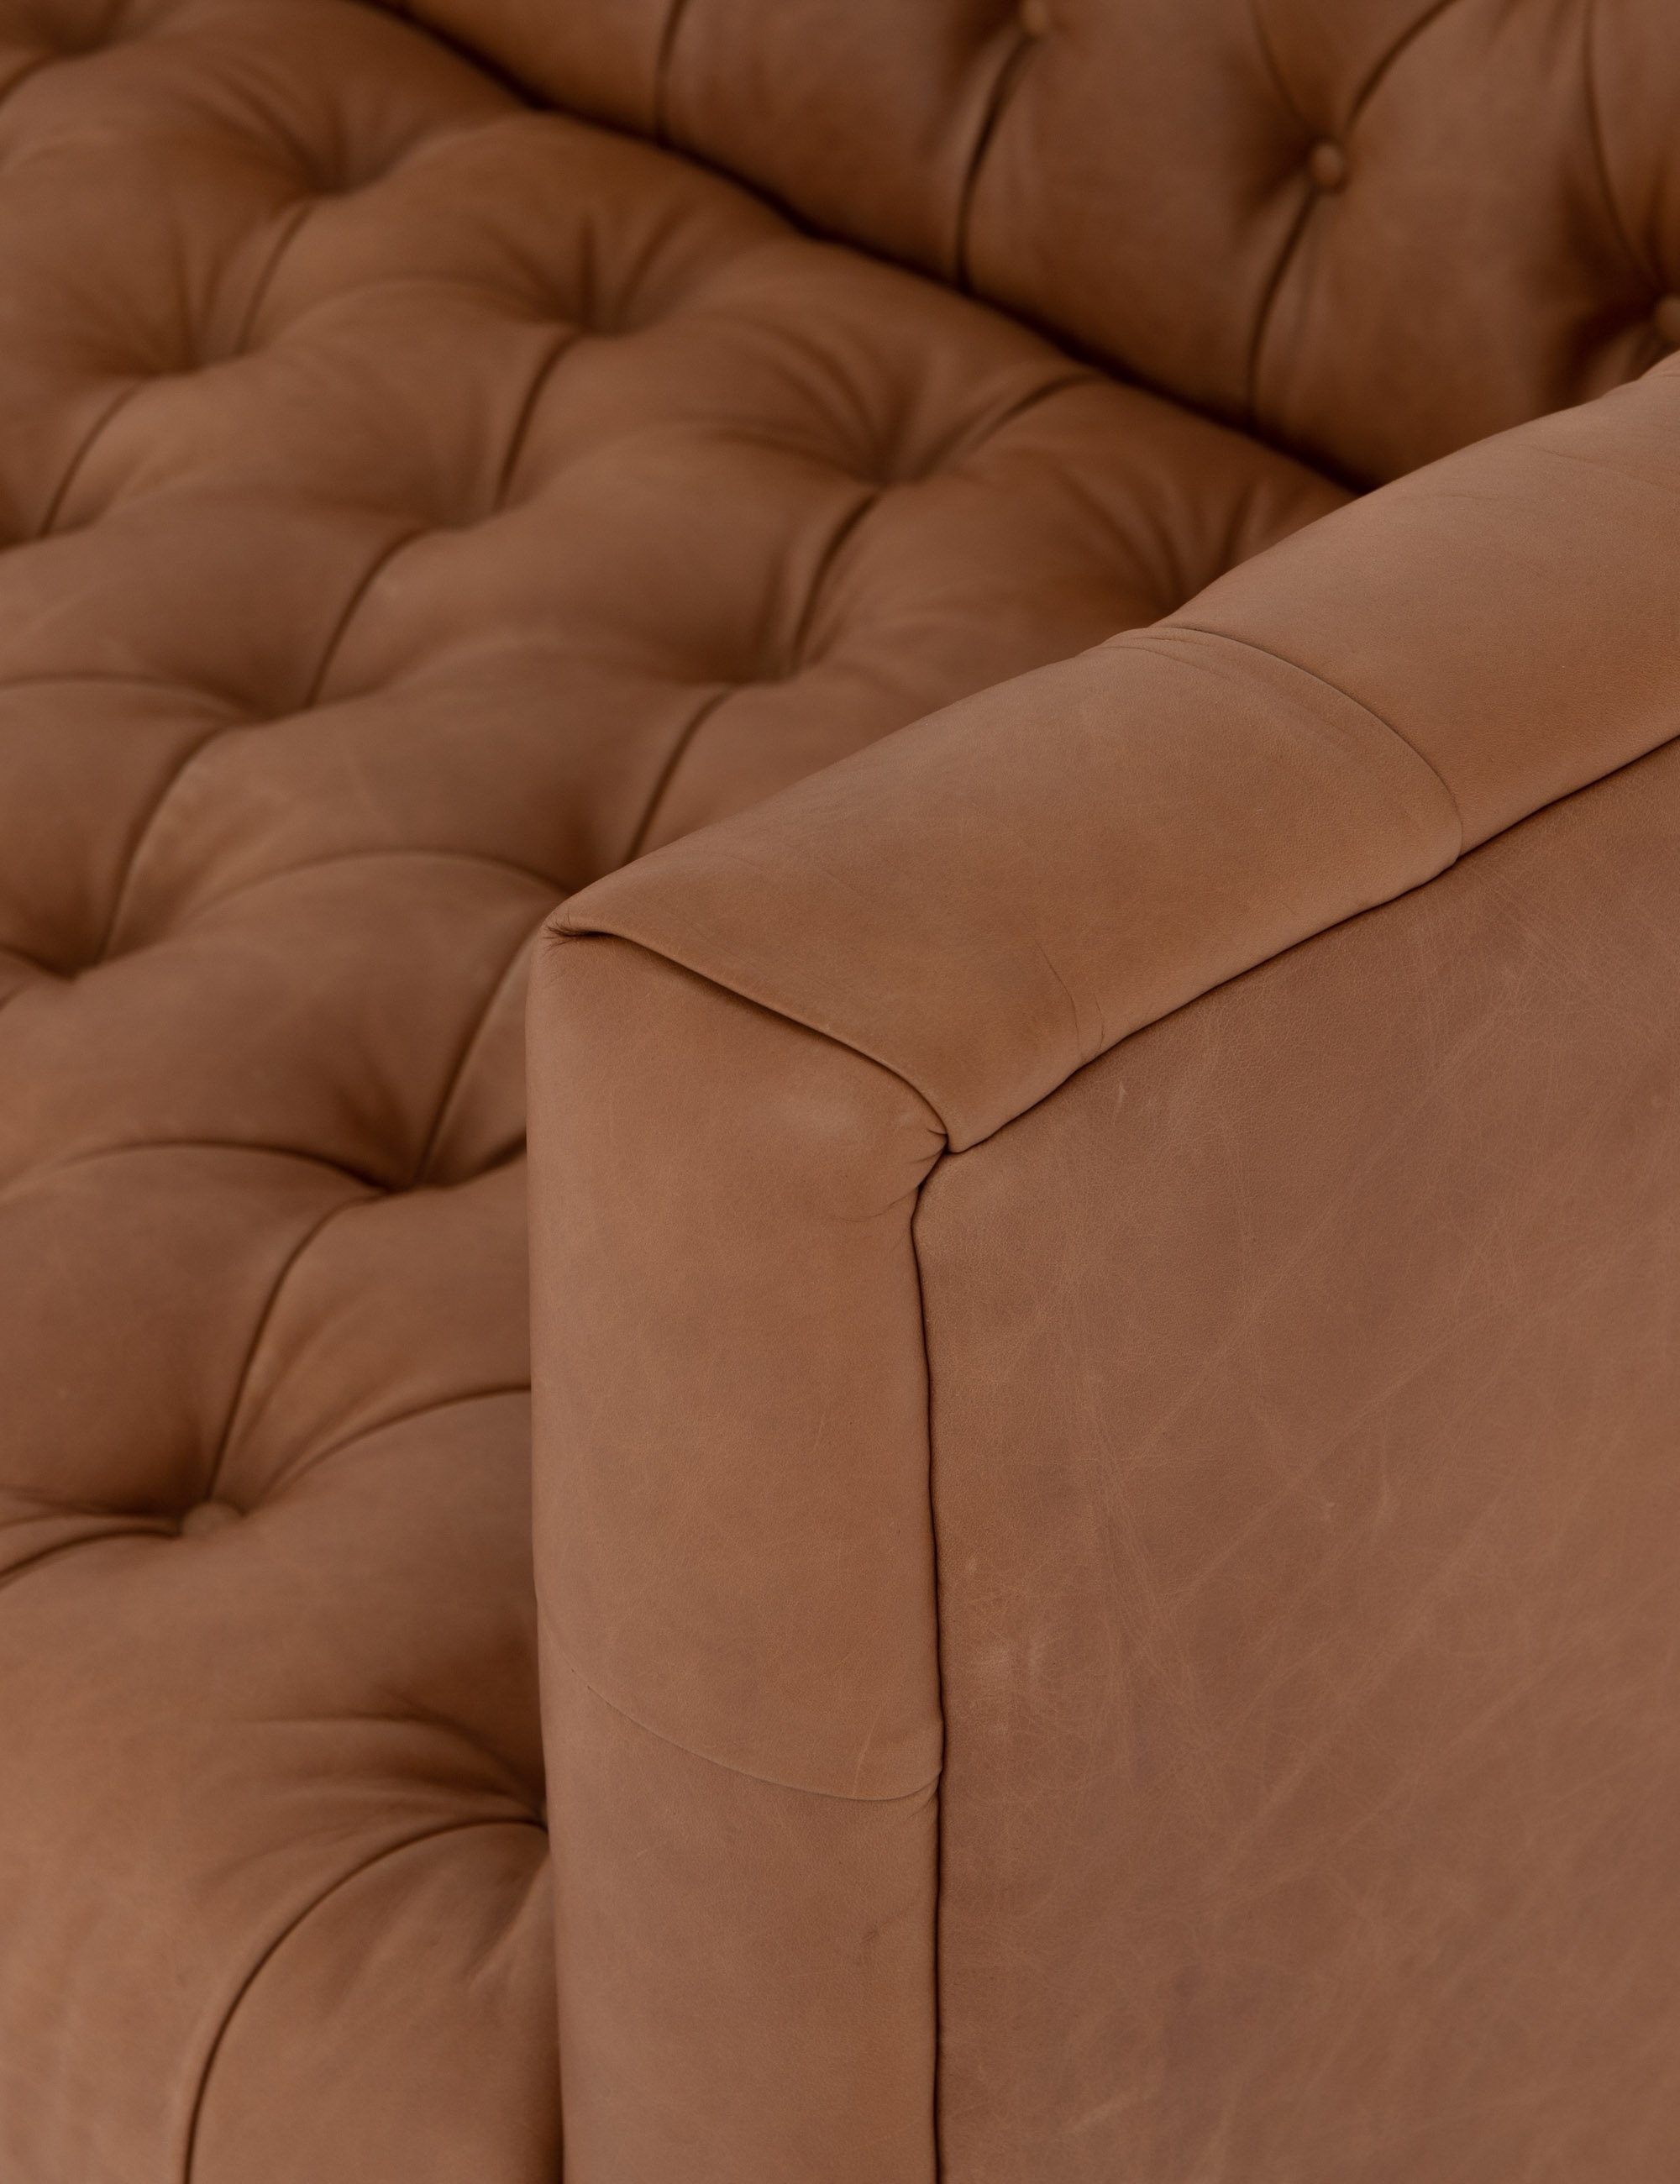 Breanne Leather Sofa, Camel, Small - Image 6